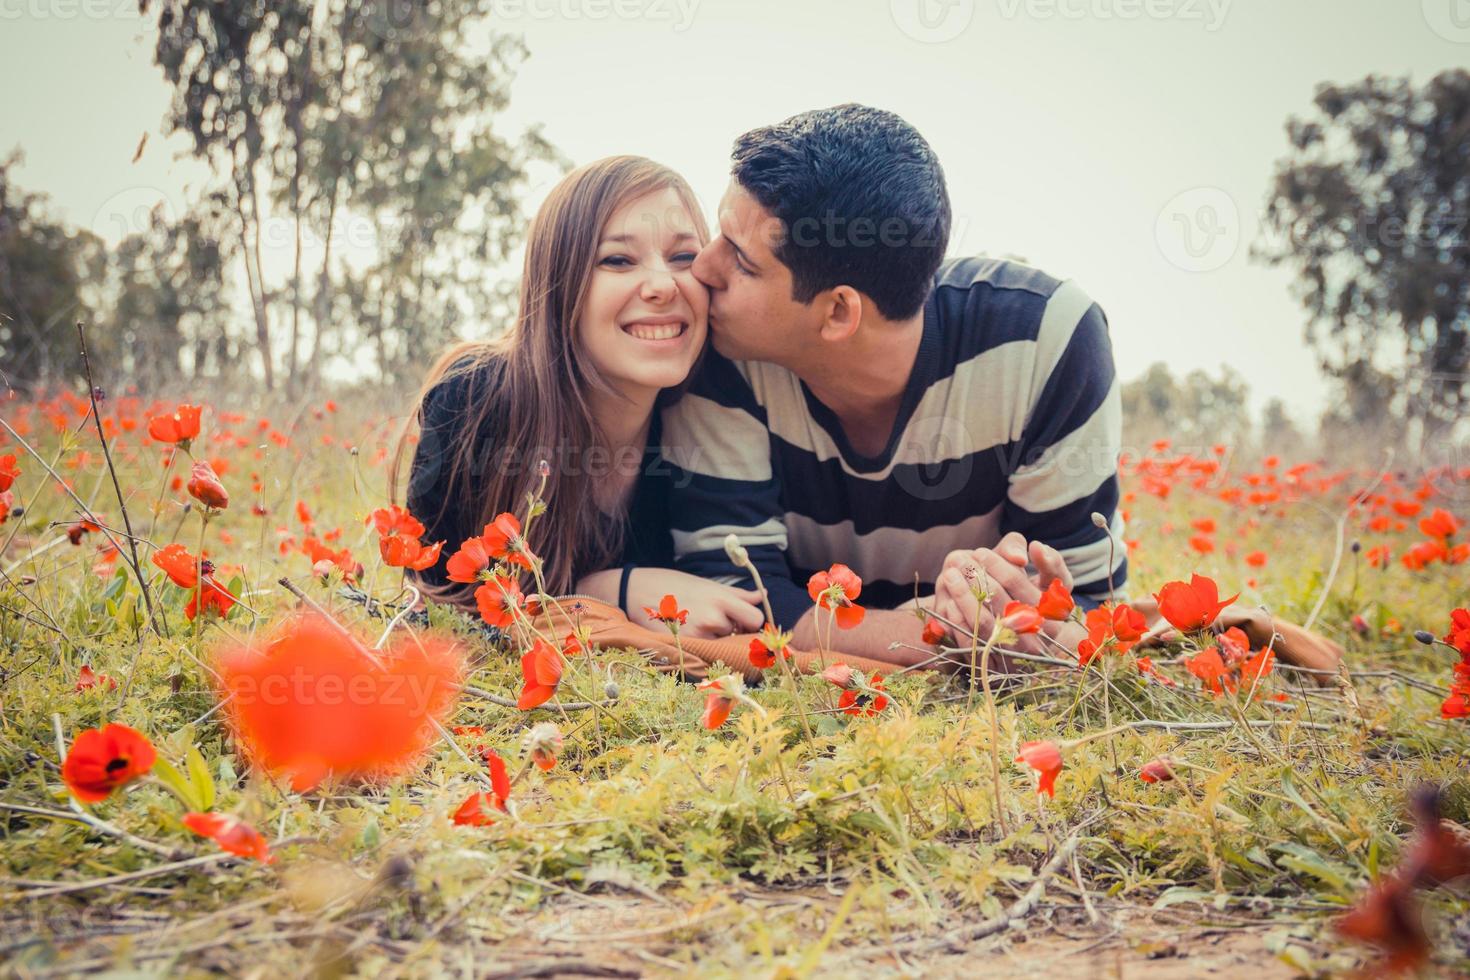 Man kissing woman and she has a toothy smile while they laying on the grass in a field of red poppies photo